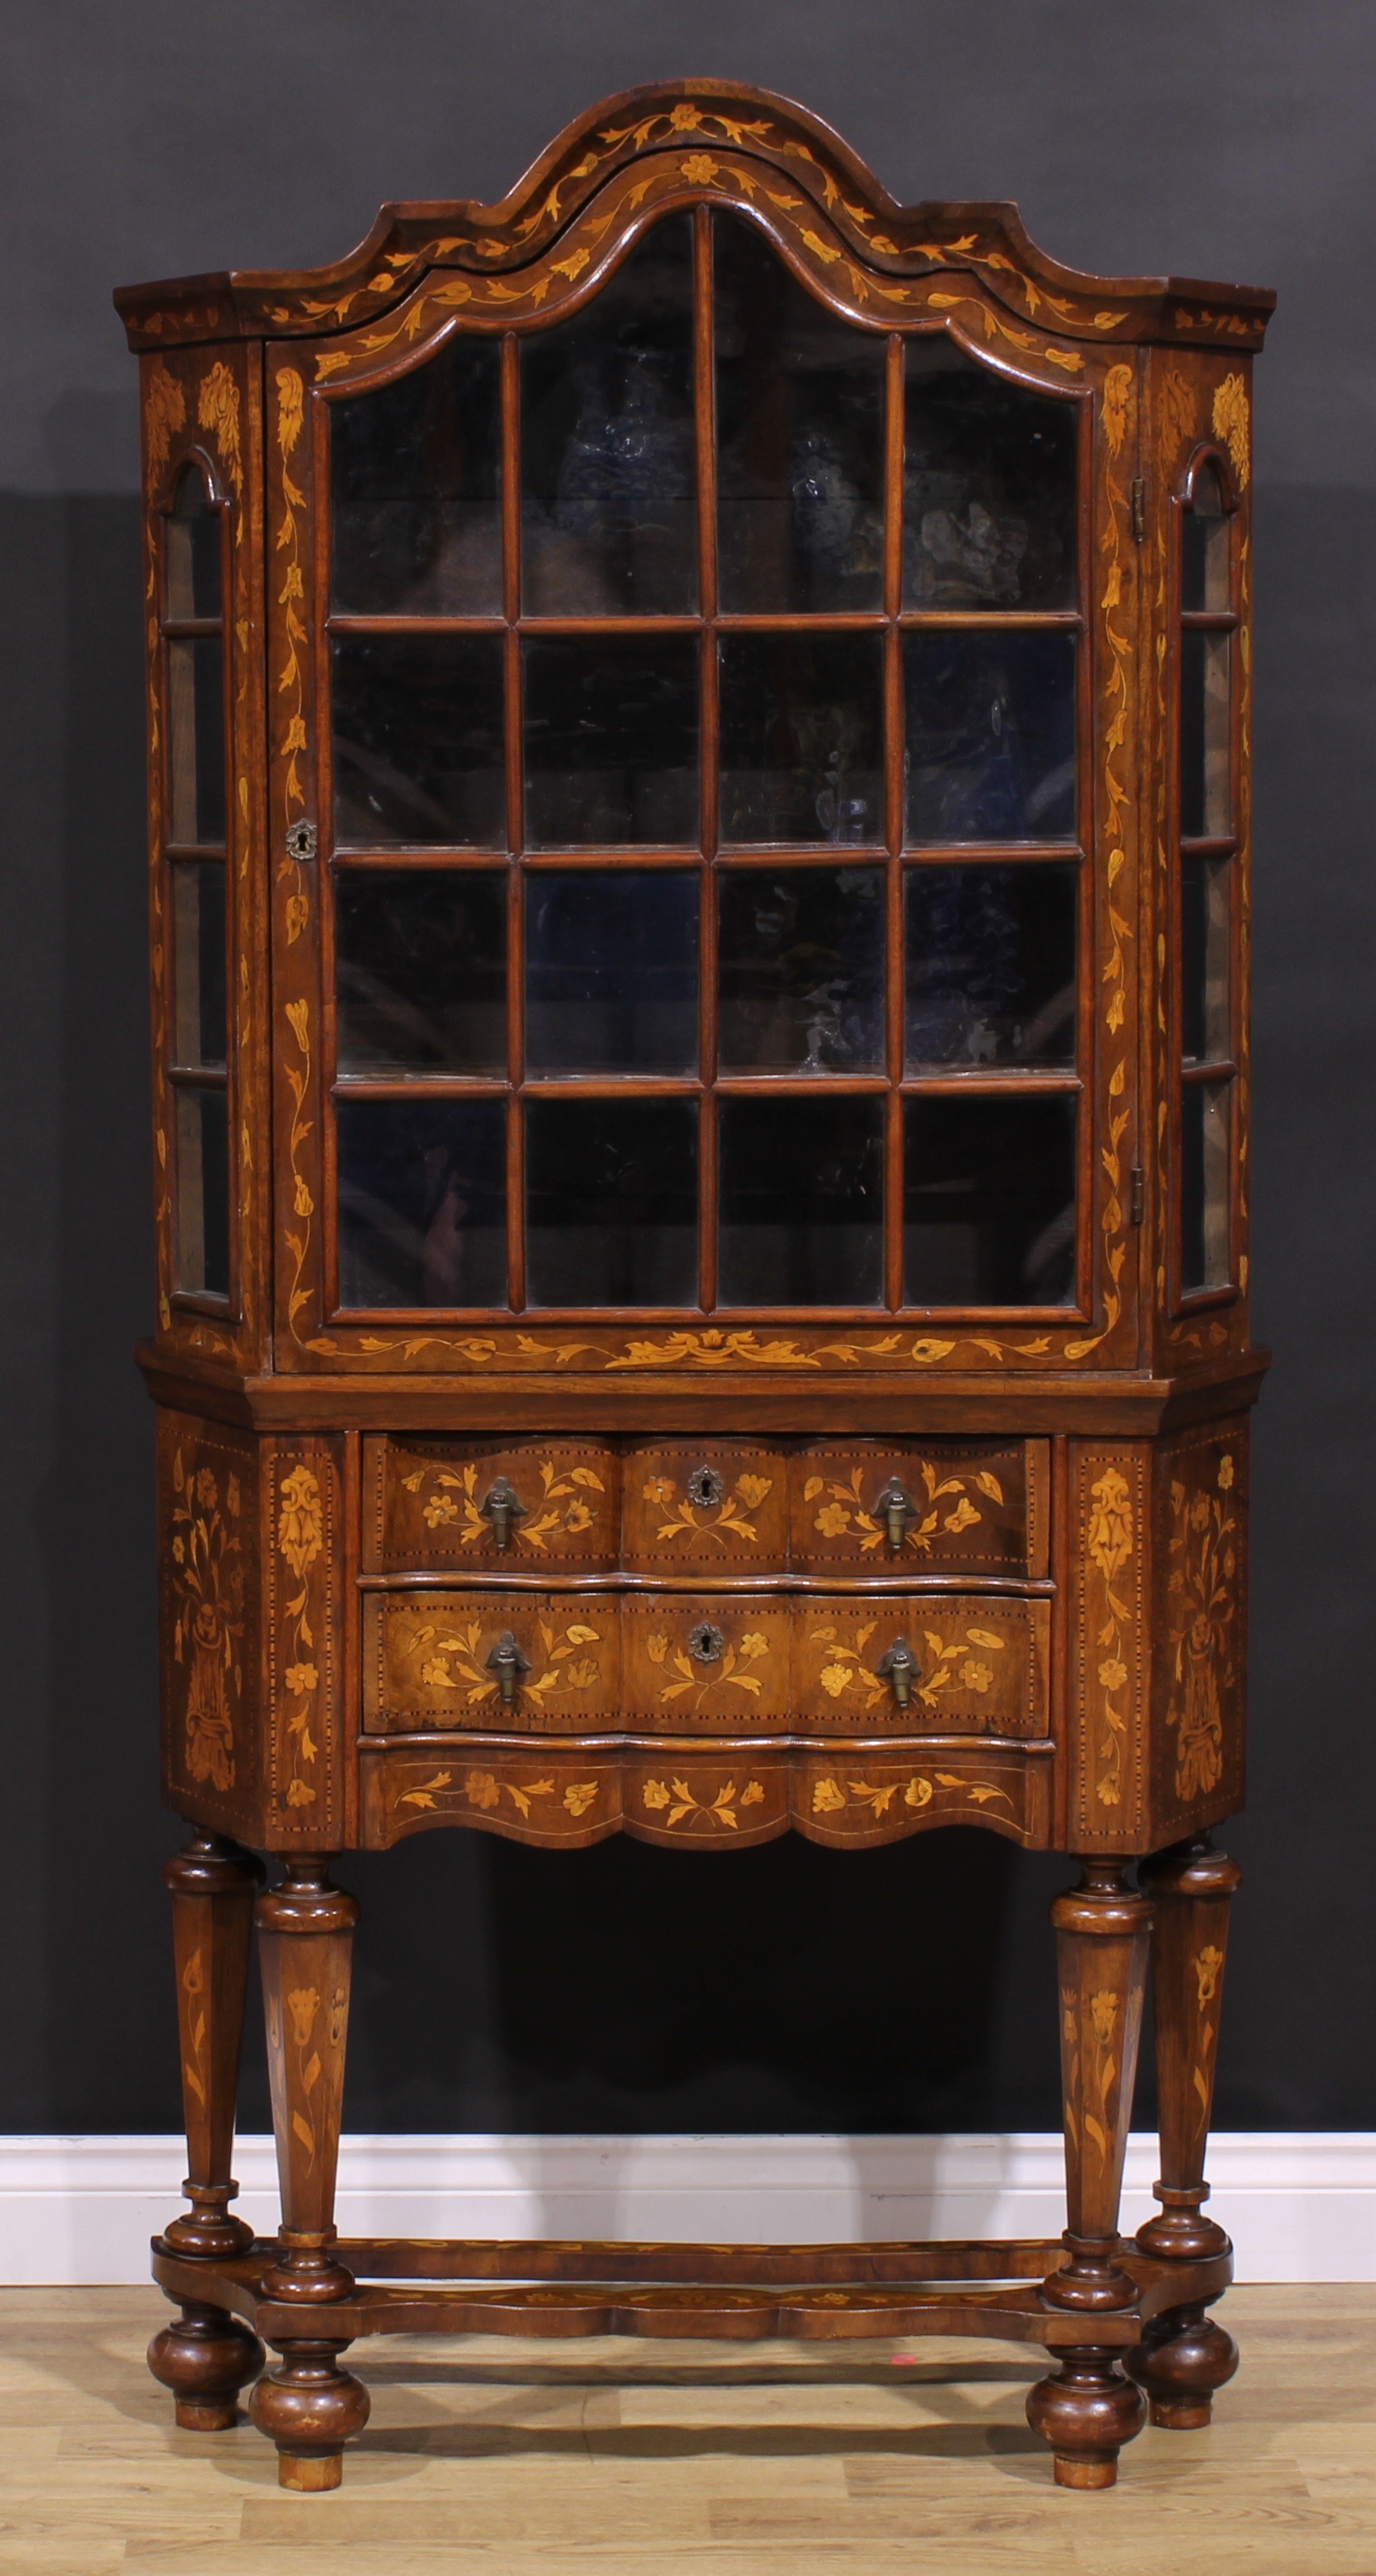 An 18th century style Dutch marquetry display cabinet, of small and neat proportions, arched cornice - Image 2 of 5